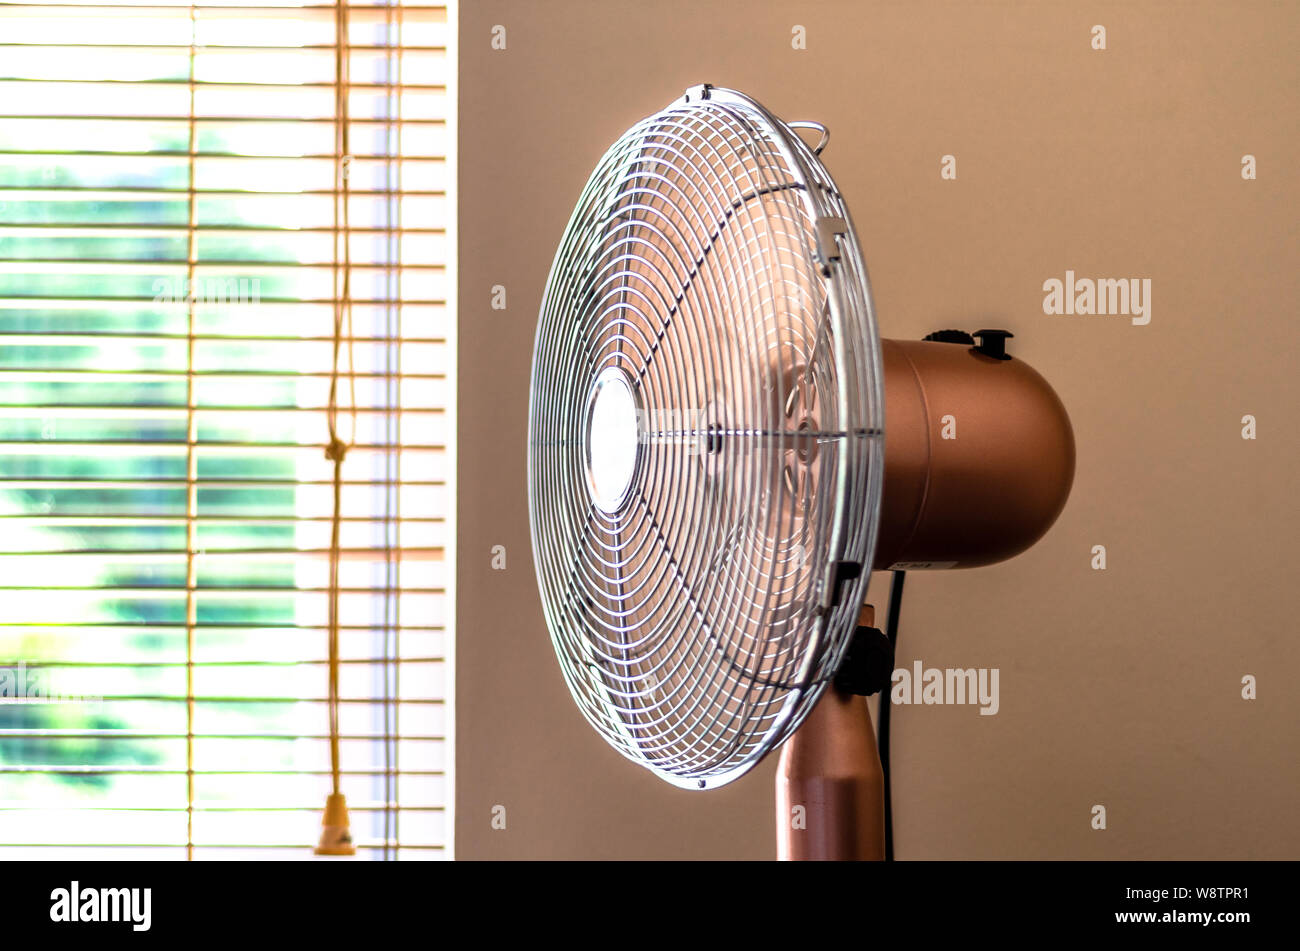 A cooling fan indoors Stock Photo